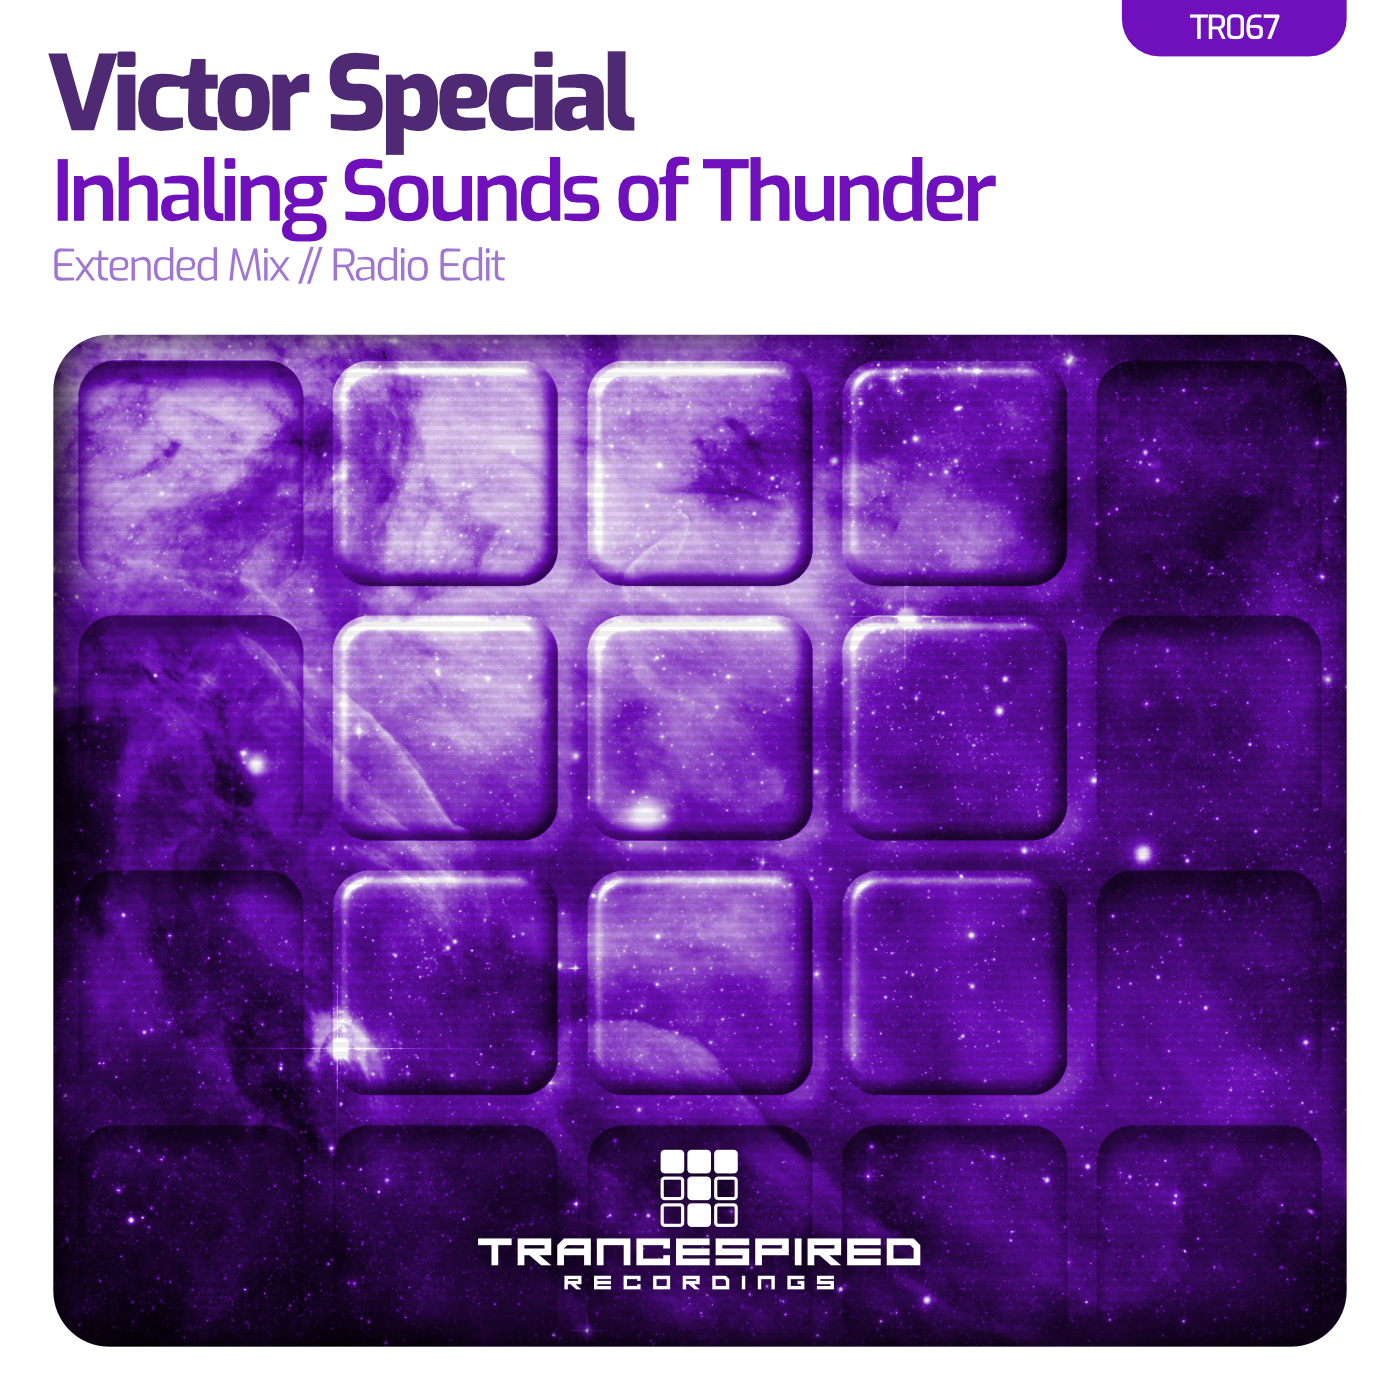 Victor Special presents Inhaling Sounds of Thunder on Trancespired Recordings